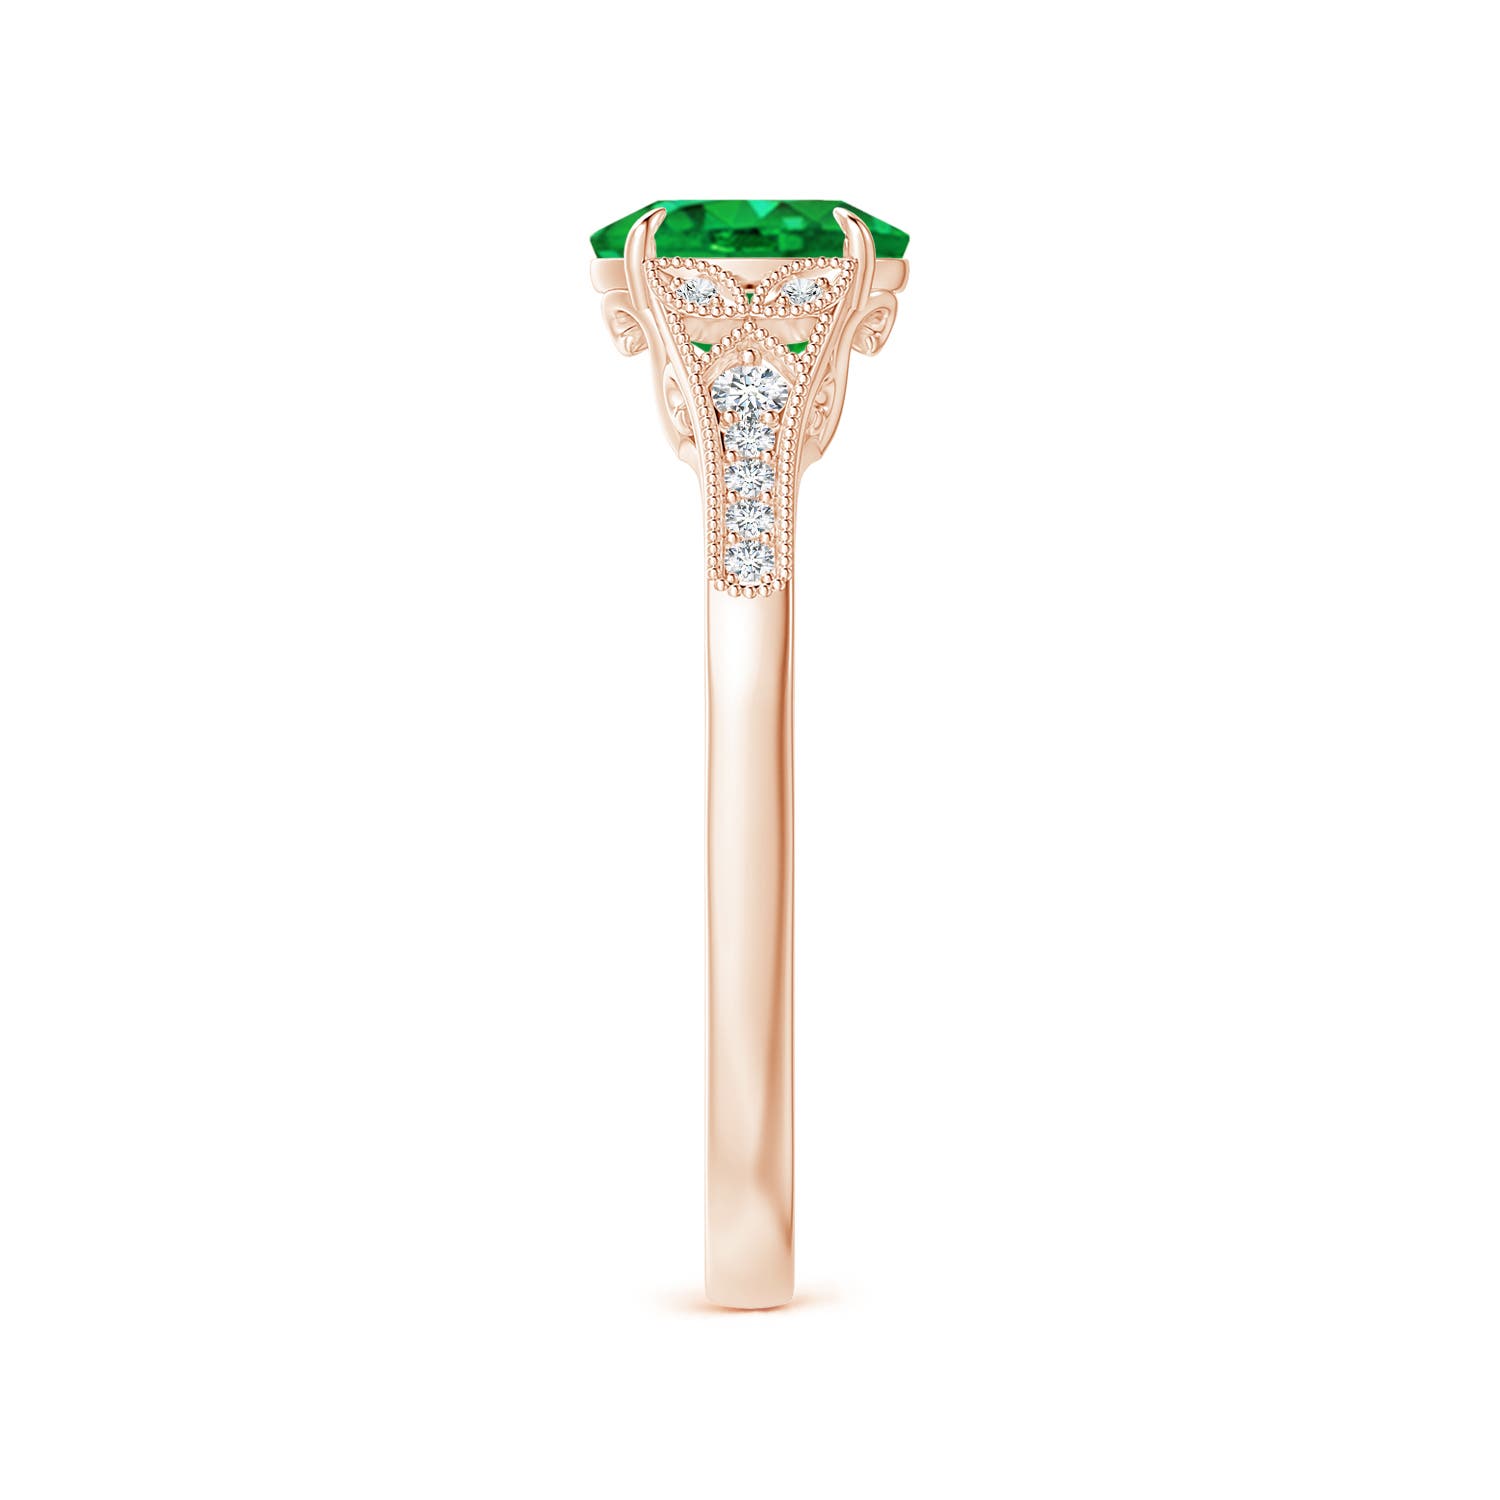 AAA - Emerald / 0.77 CT / 14 KT Rose Gold